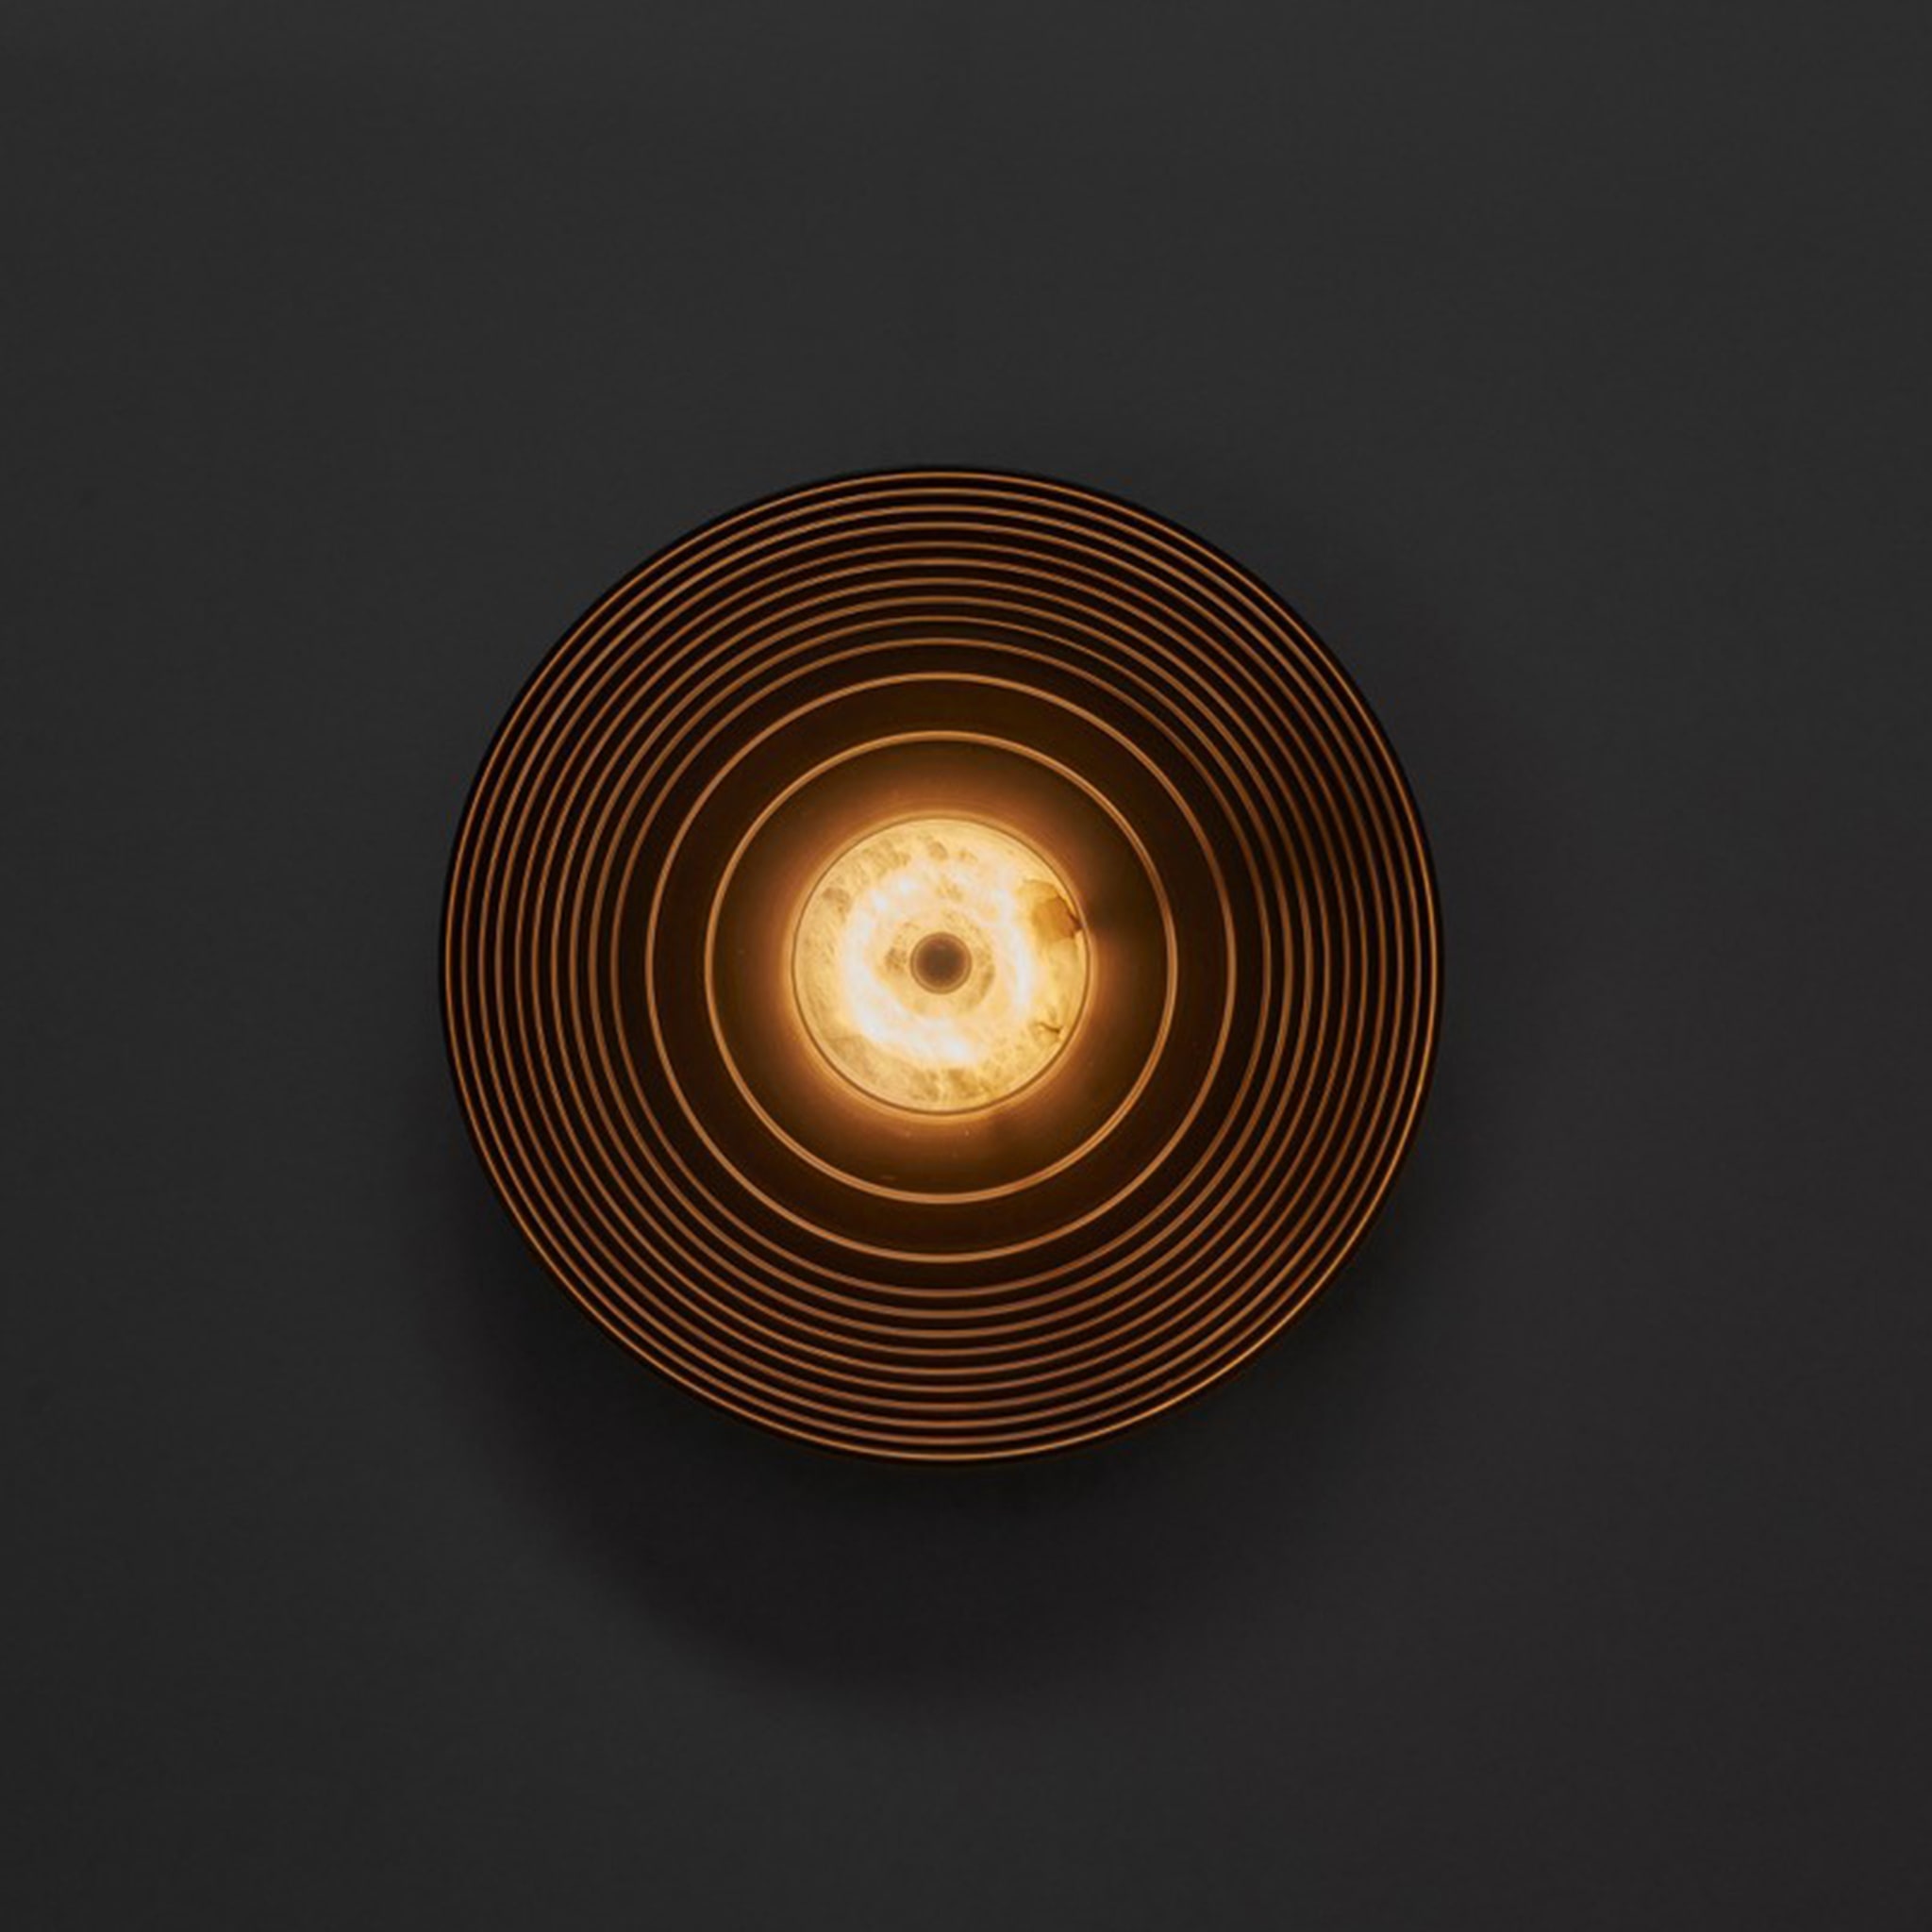 Sculptural Wall Sconce "Gong" By LC Atelier - Alternative view 1